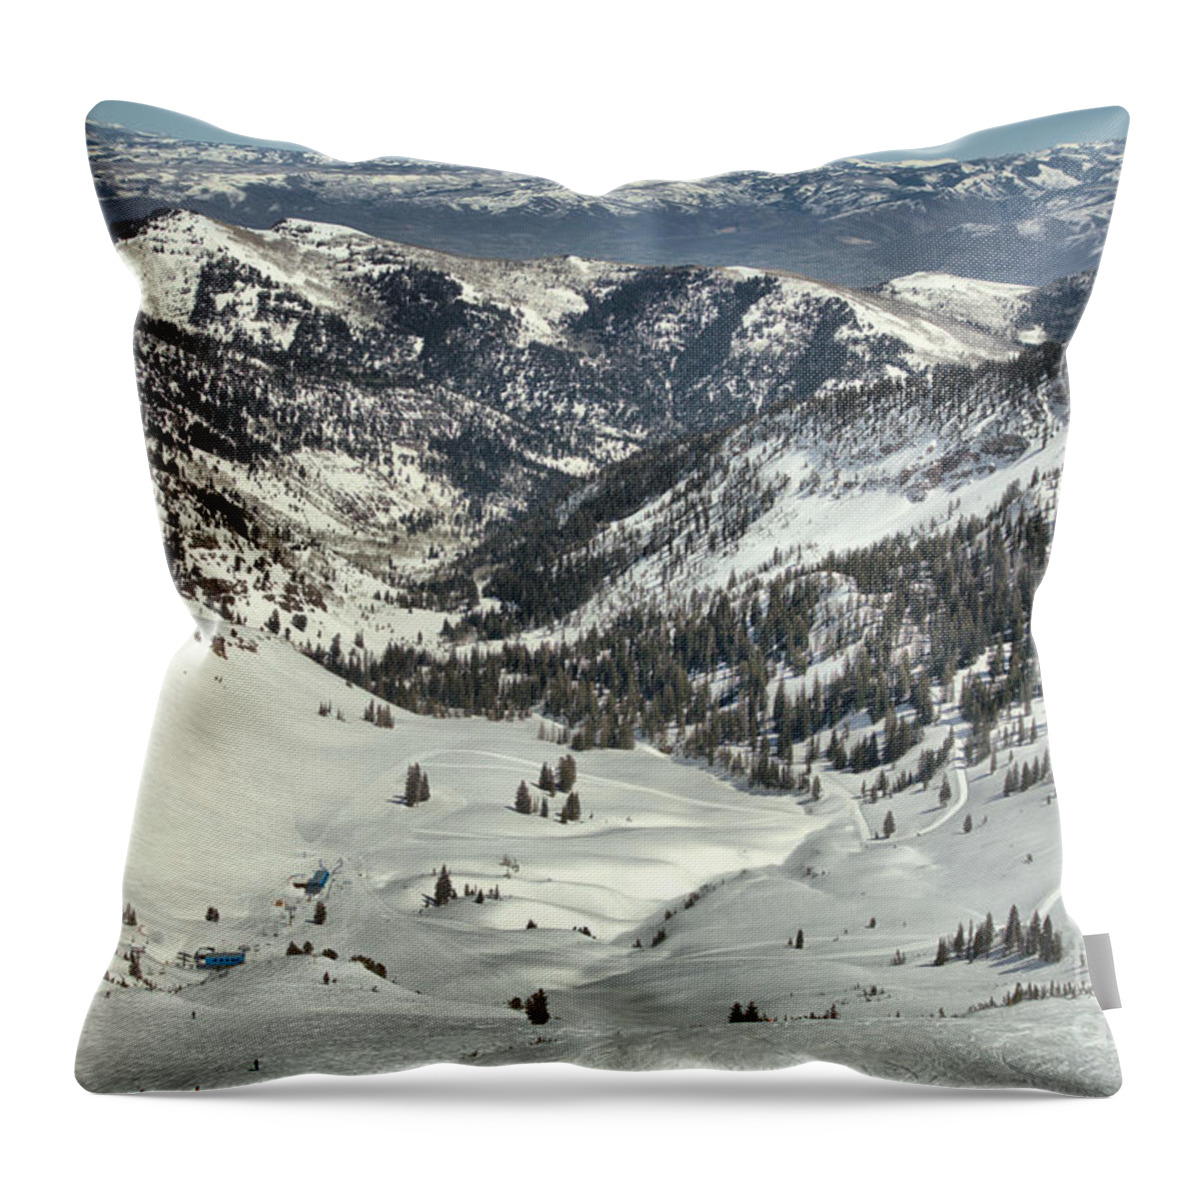 Snowbird Throw Pillow featuring the photograph Bumps In Mineral Basin by Adam Jewell